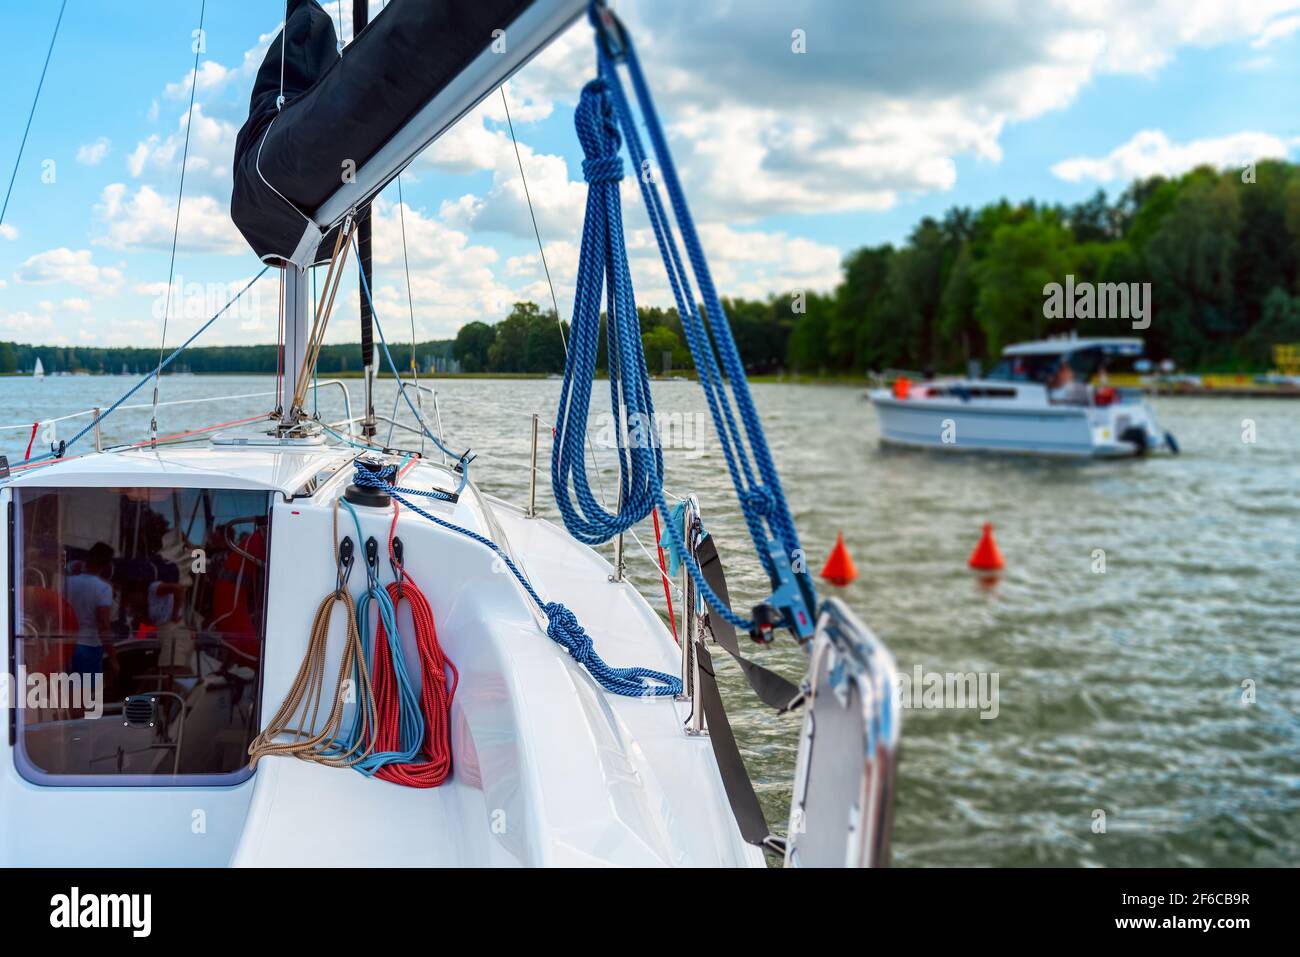 Detail of a sailboat deck with a winch and nylon ropes. Sailing yacht rigging equipment Stock Photo